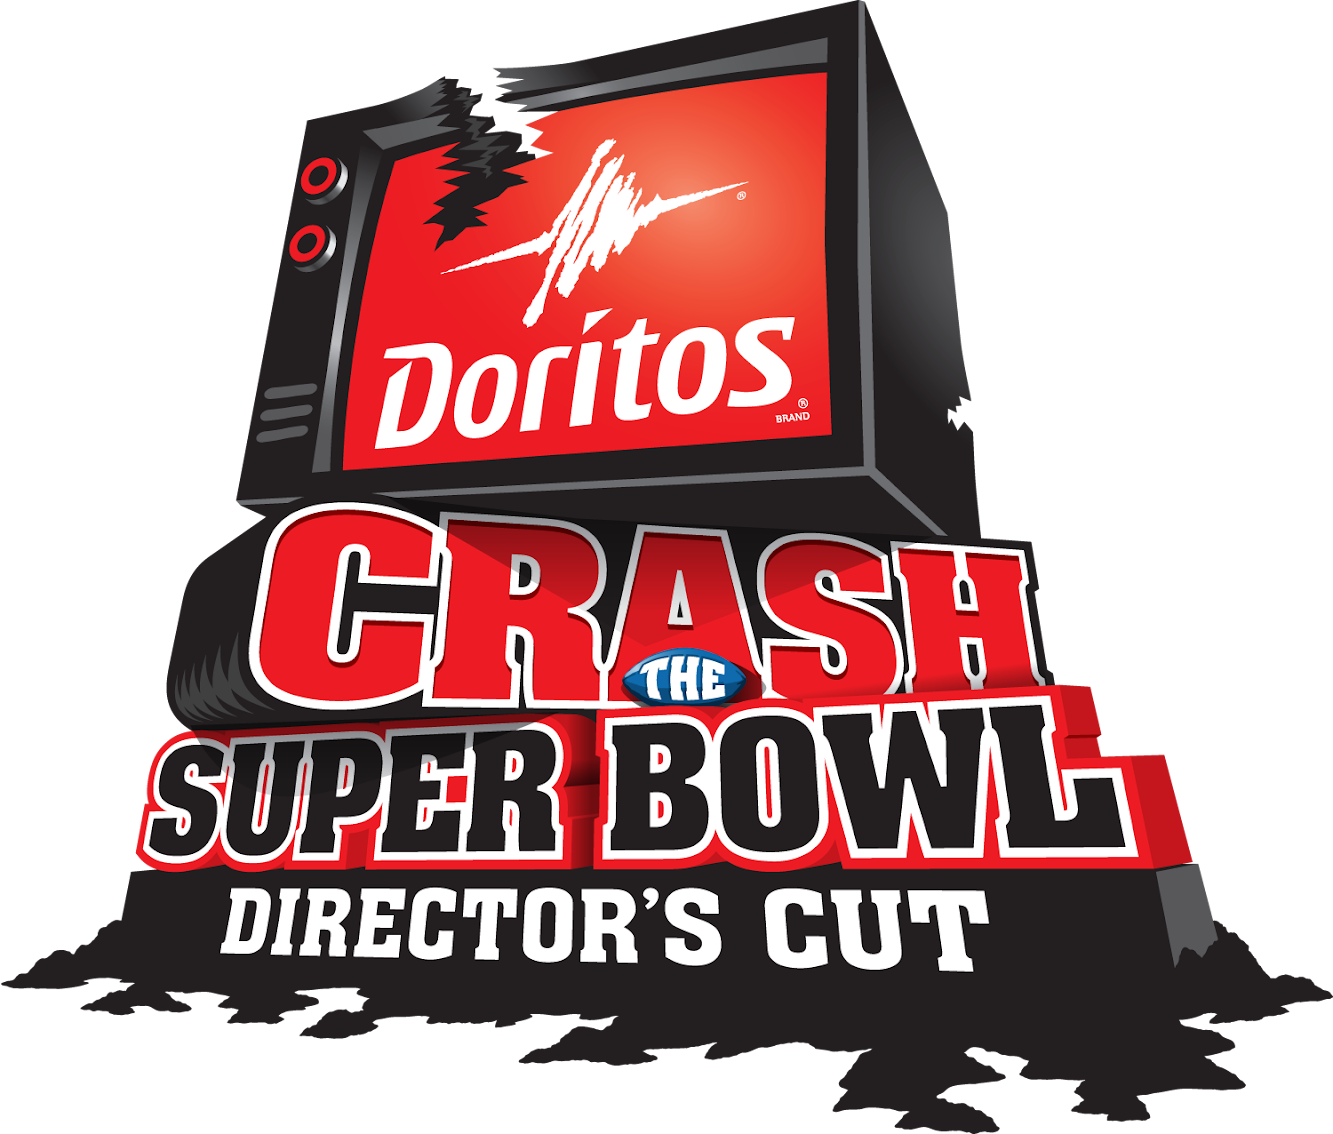 Crash The Super Bowl is Back For 2013 In A Big Way